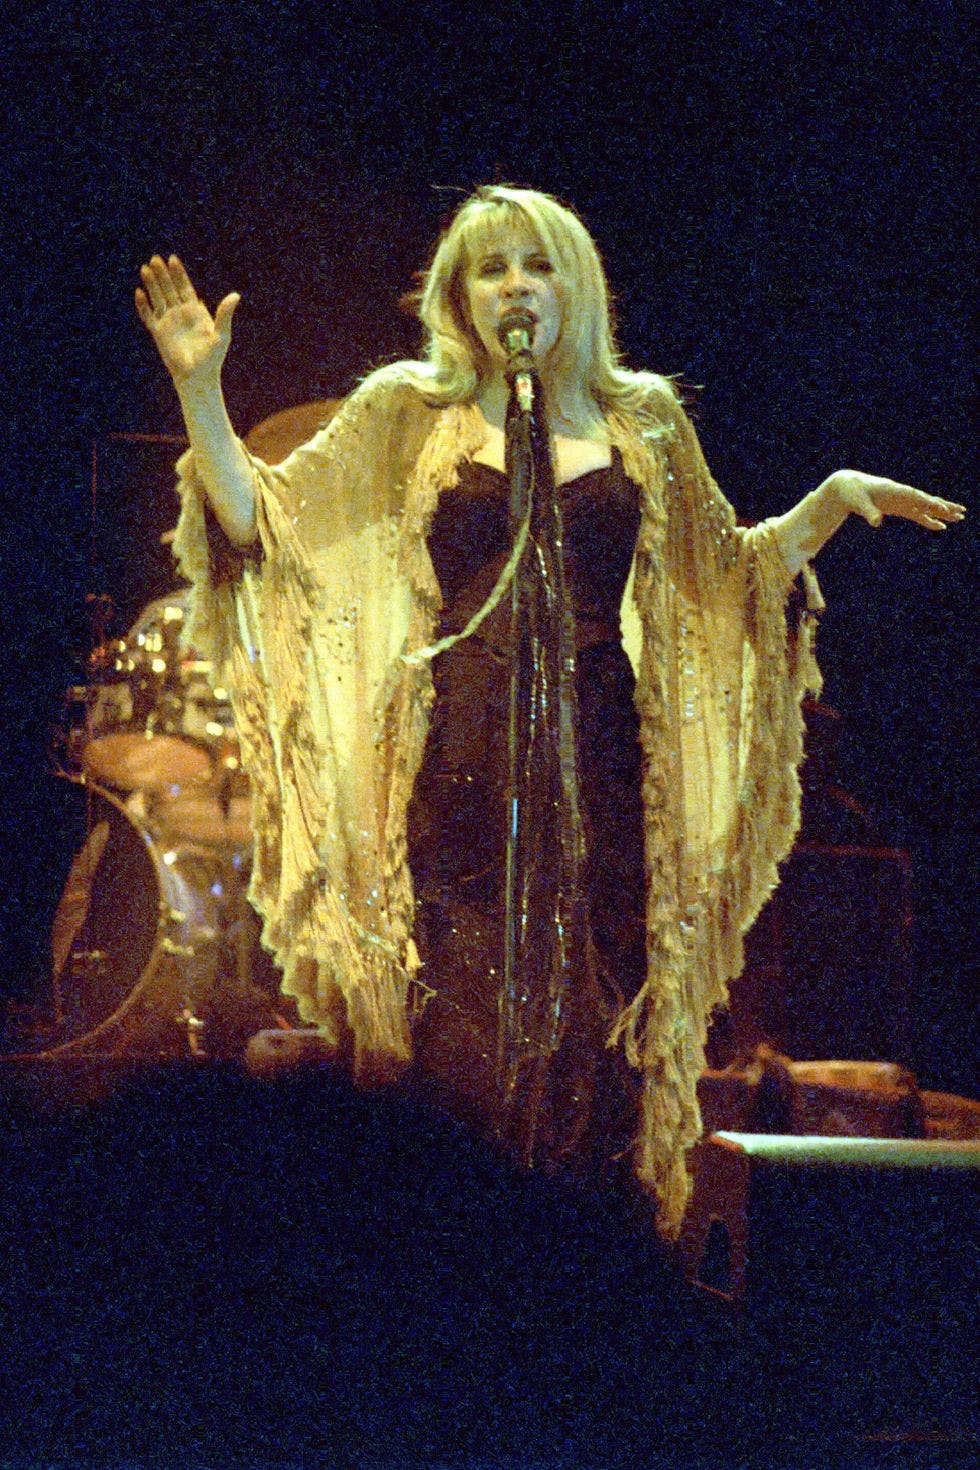 Rock legend Stevie Nicks and the style that goes with the years - 5